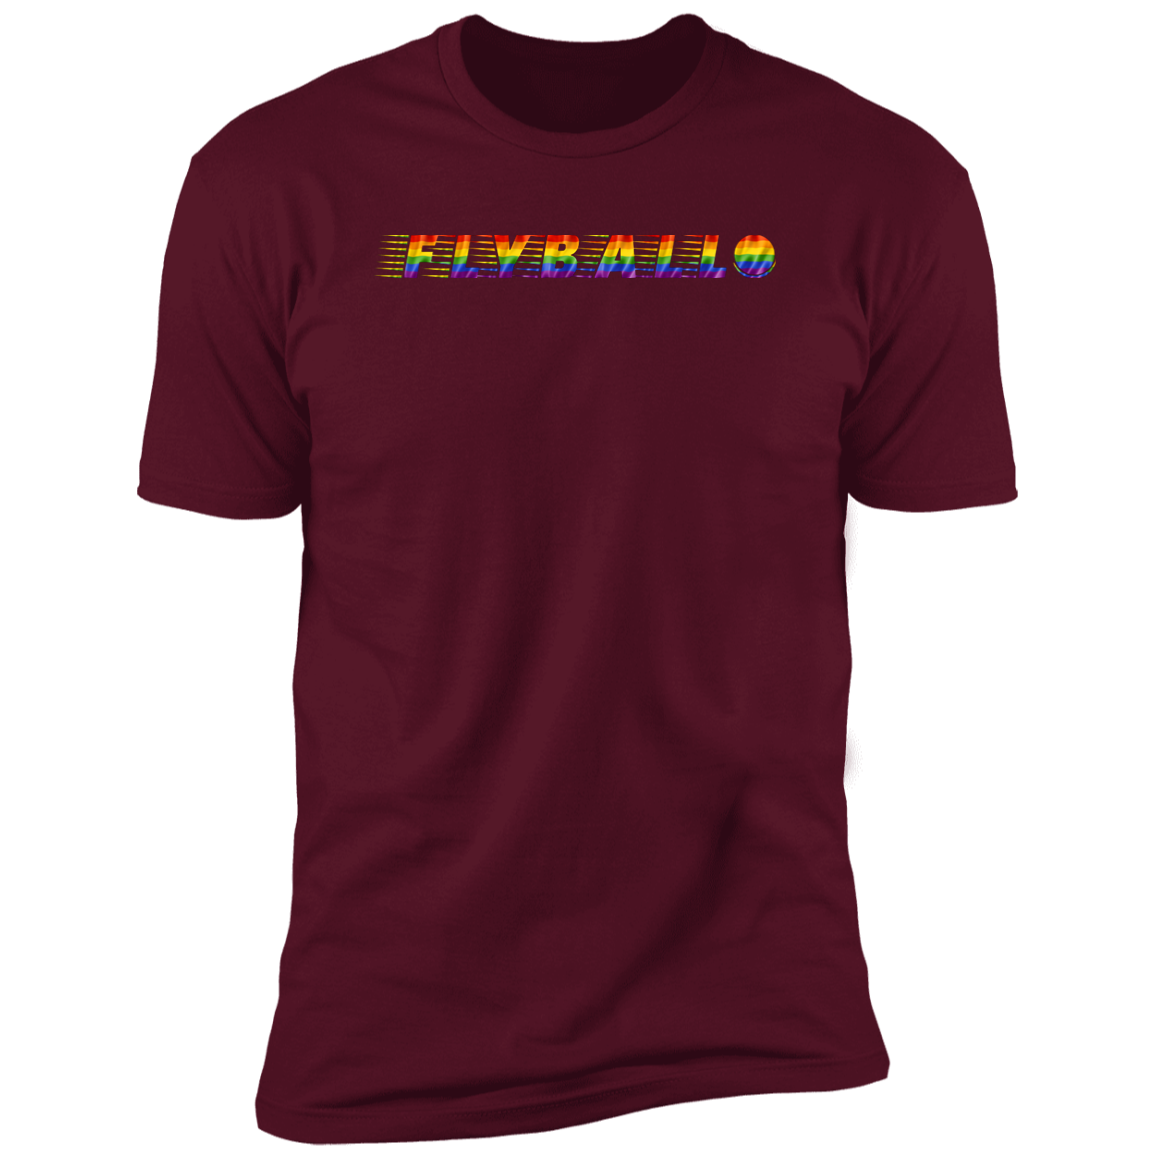 Flyball pride t-shirt, dog pride dog flyball shirt for humans, in maroon